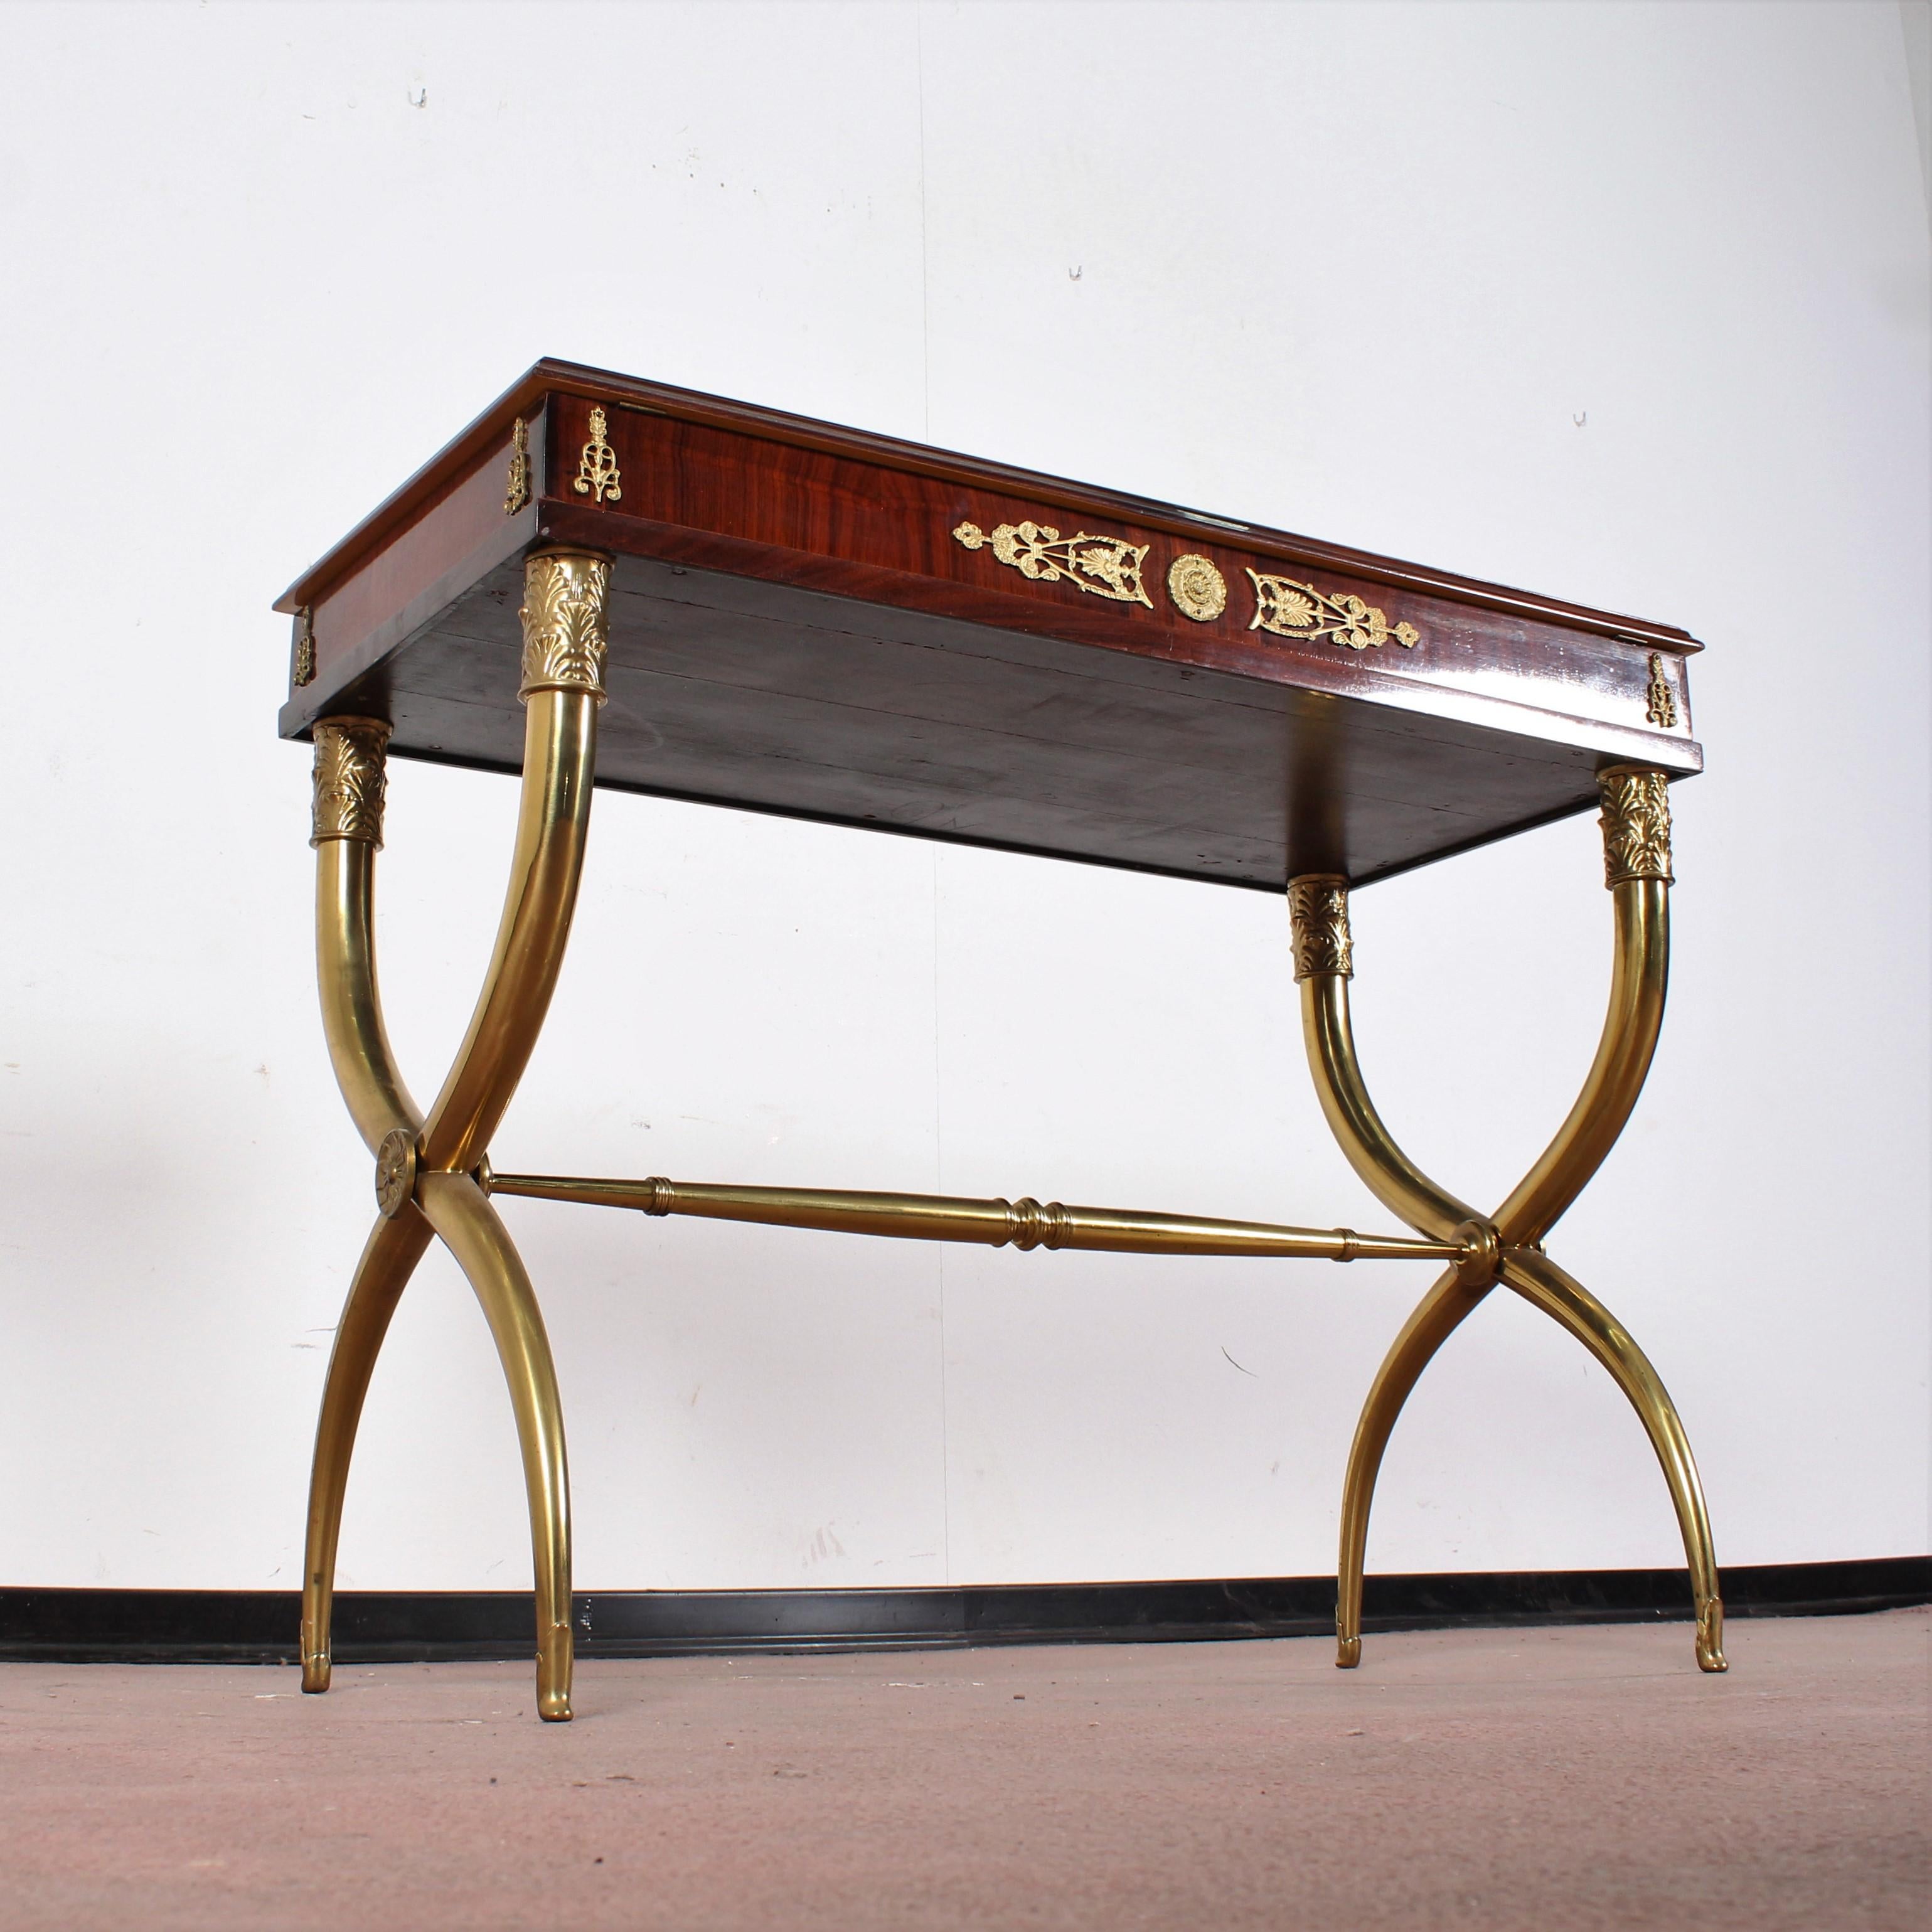 Midcentury Gio Ponti Wood and Brass Console Table with Top Container 1950s Italy 12